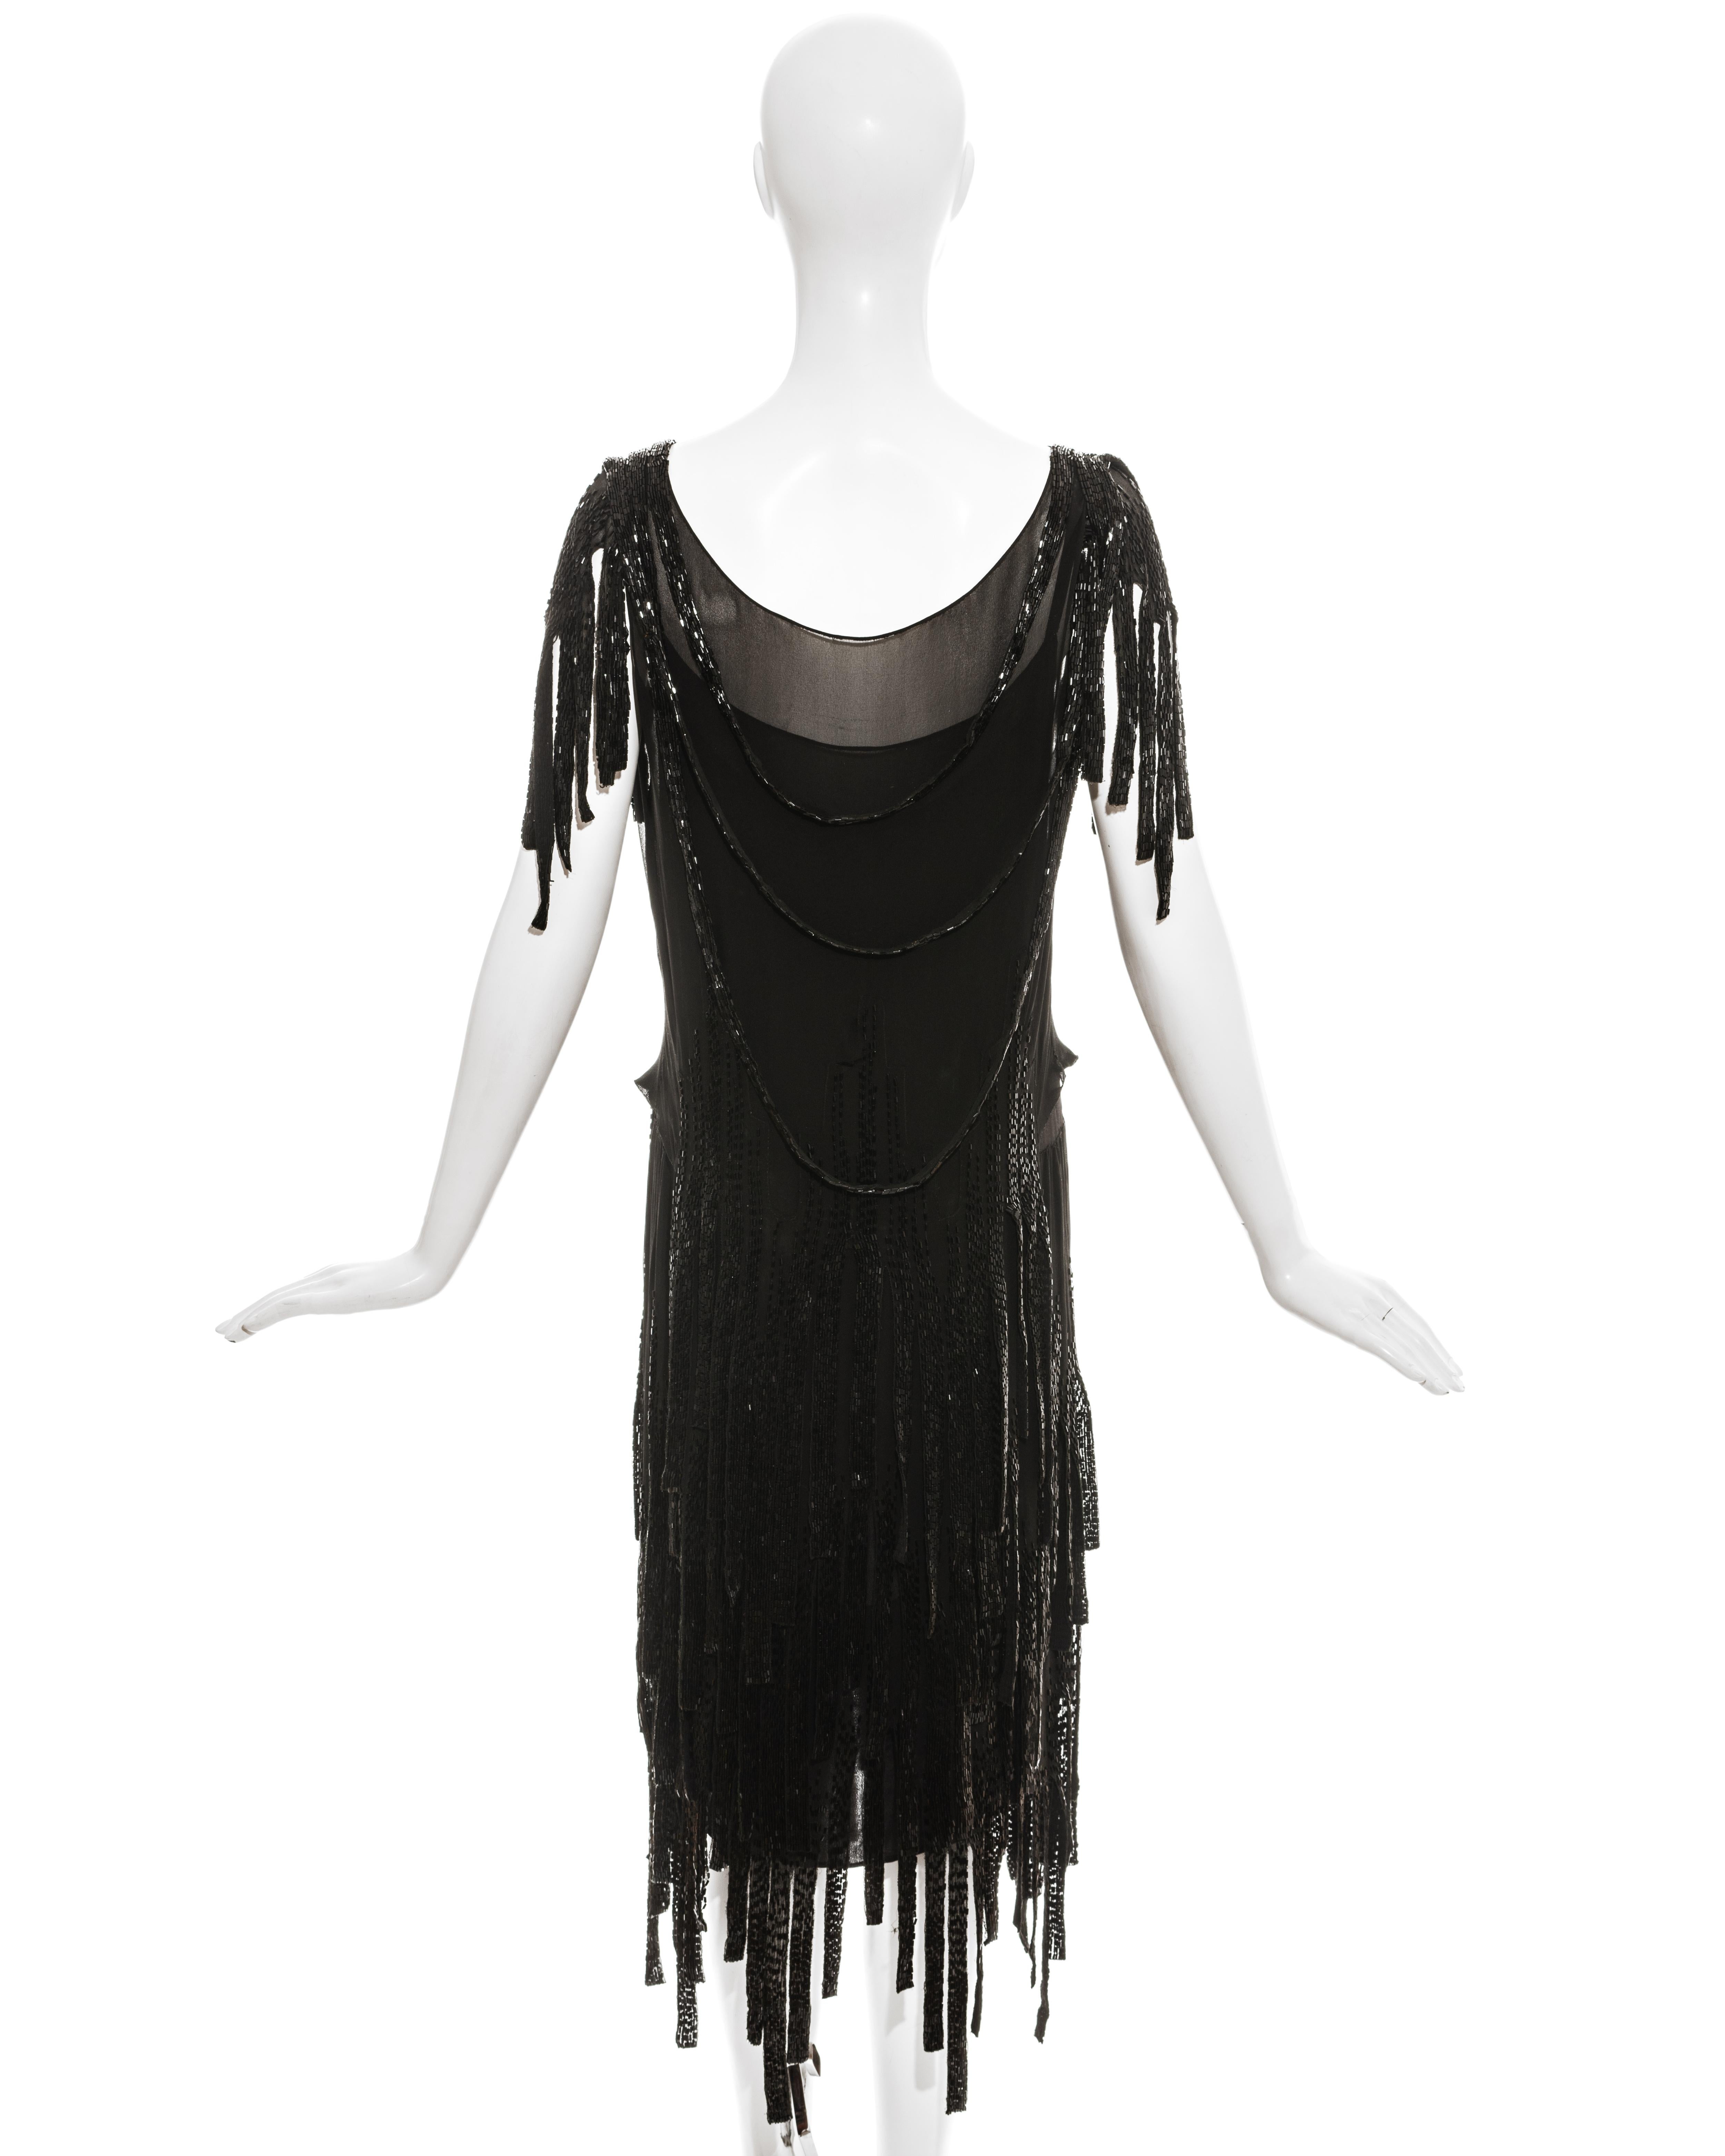 Sewing Project Material 1920s Panels Sequined Flapper Dress Black Silk Lace Tulle Dress Fabric